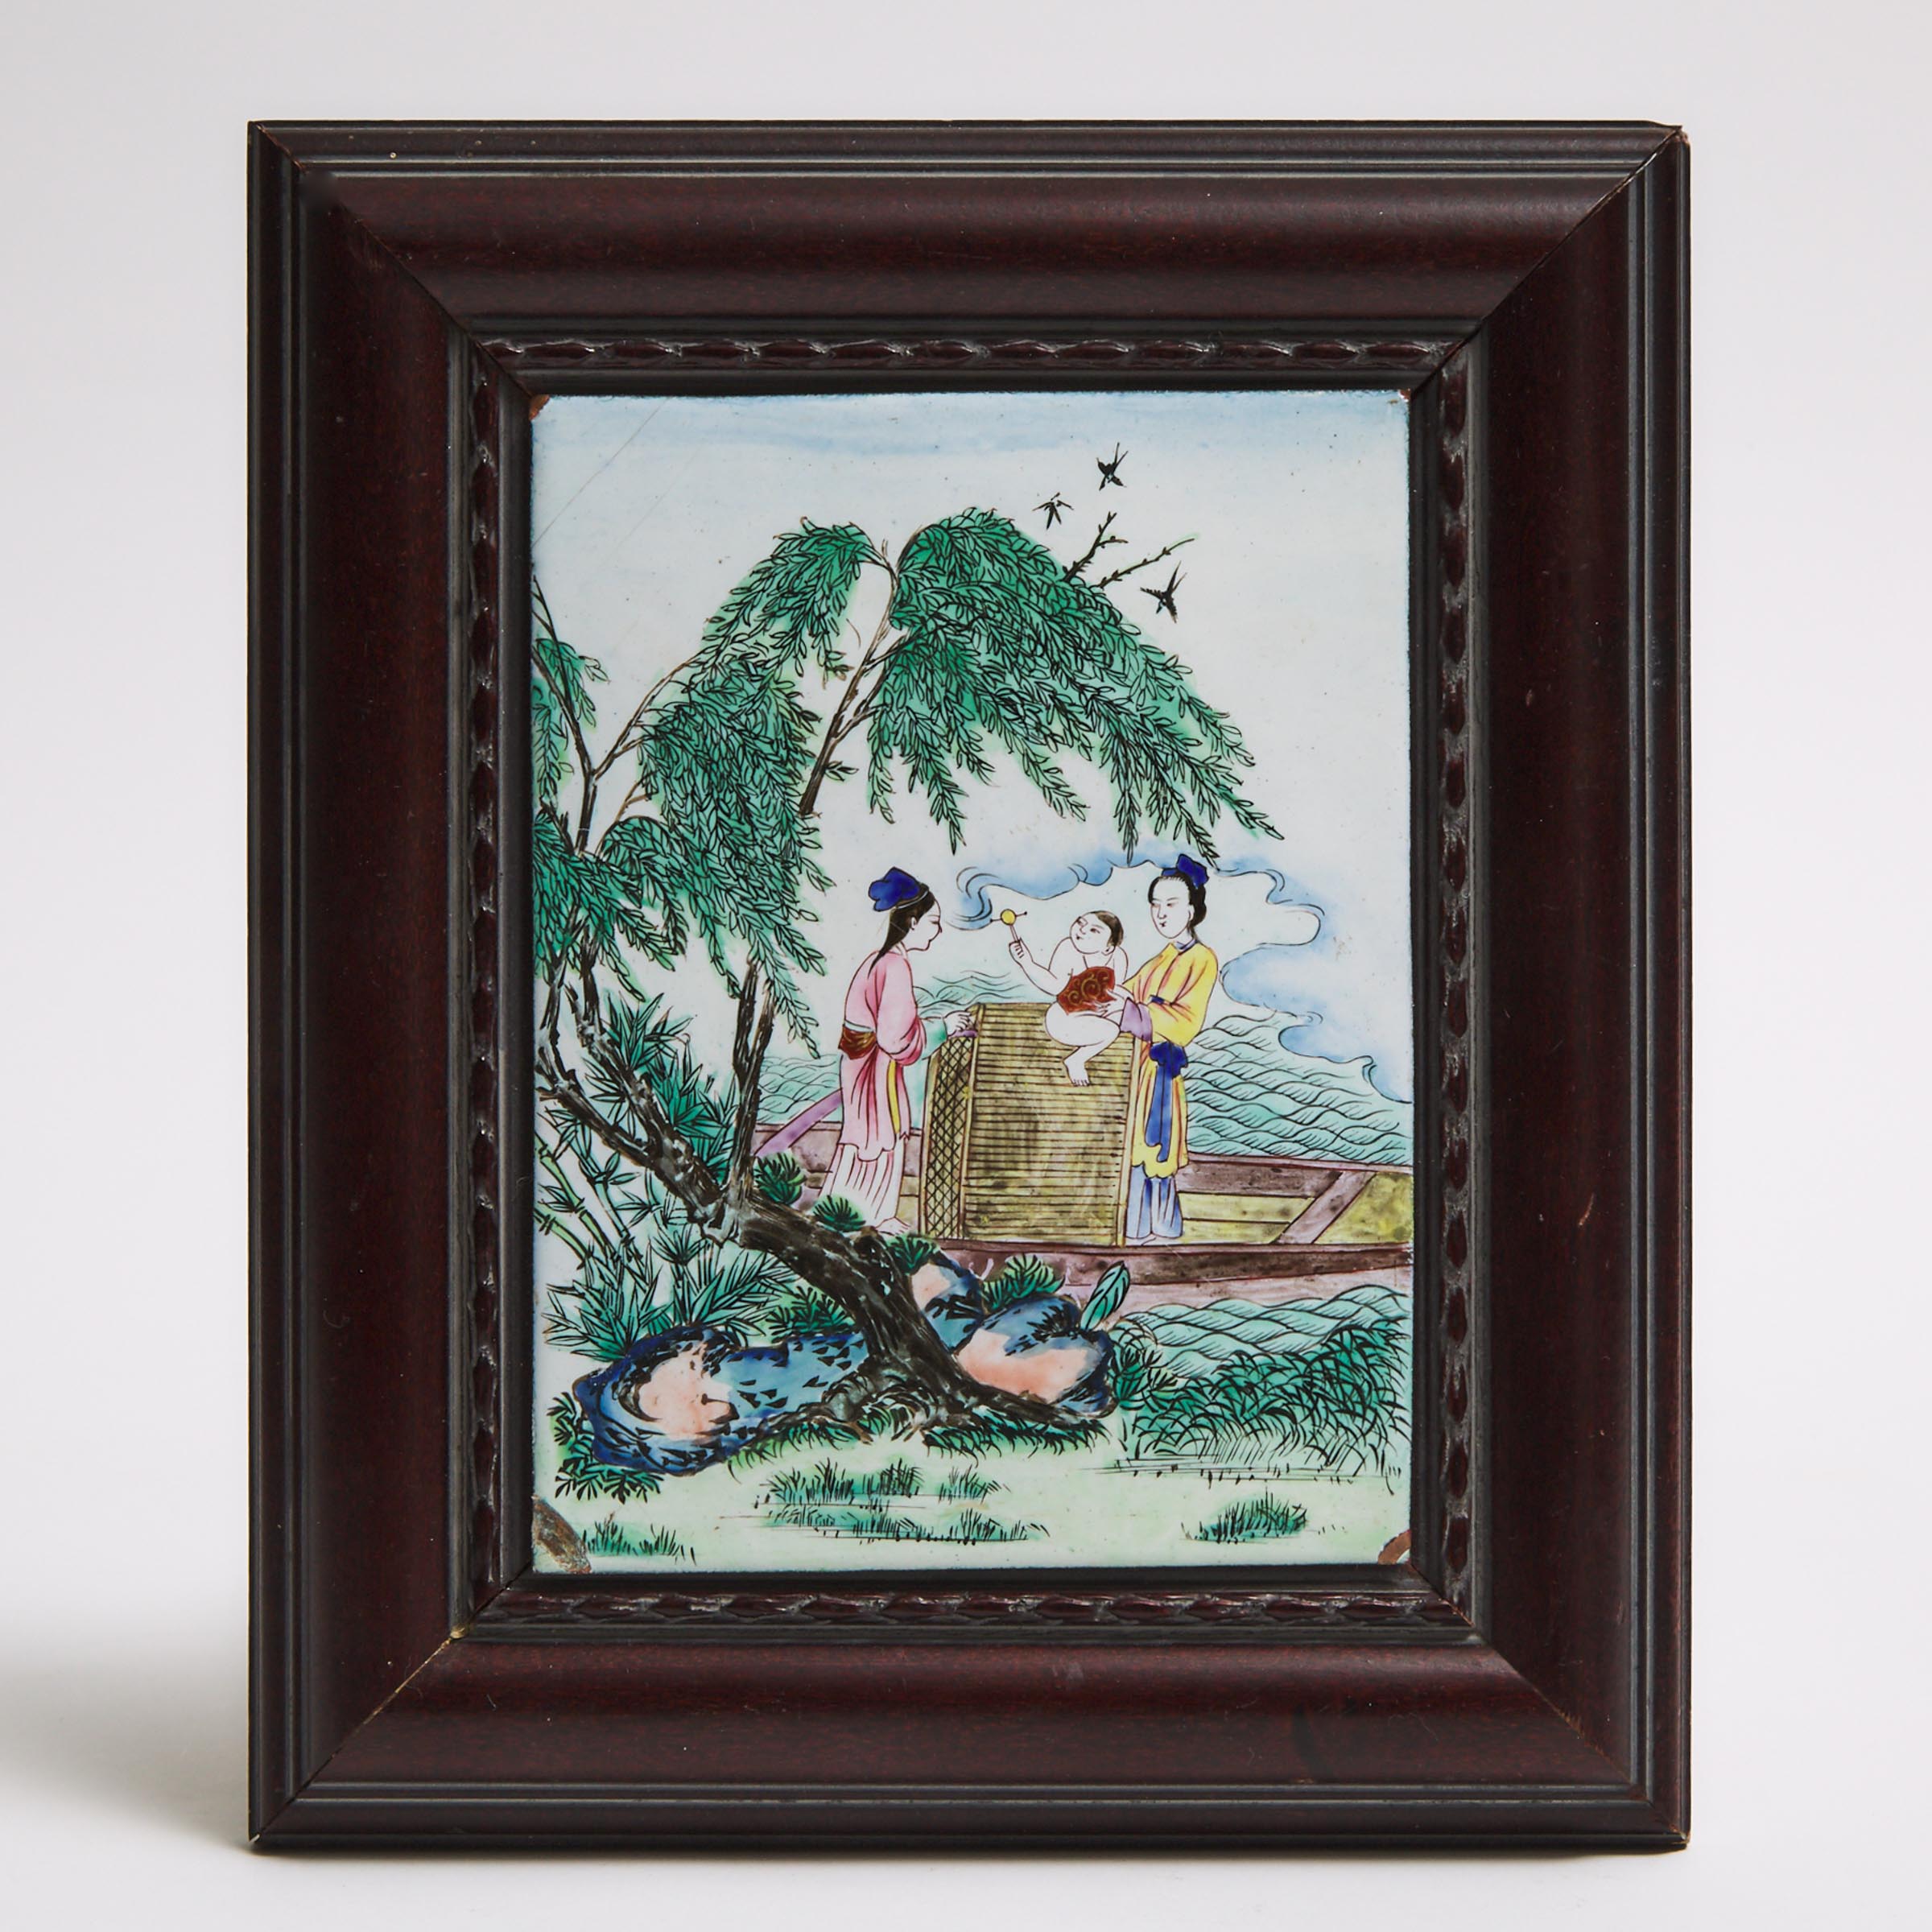 A Canton Enamel Square Panel, Early to Mid 20th Century